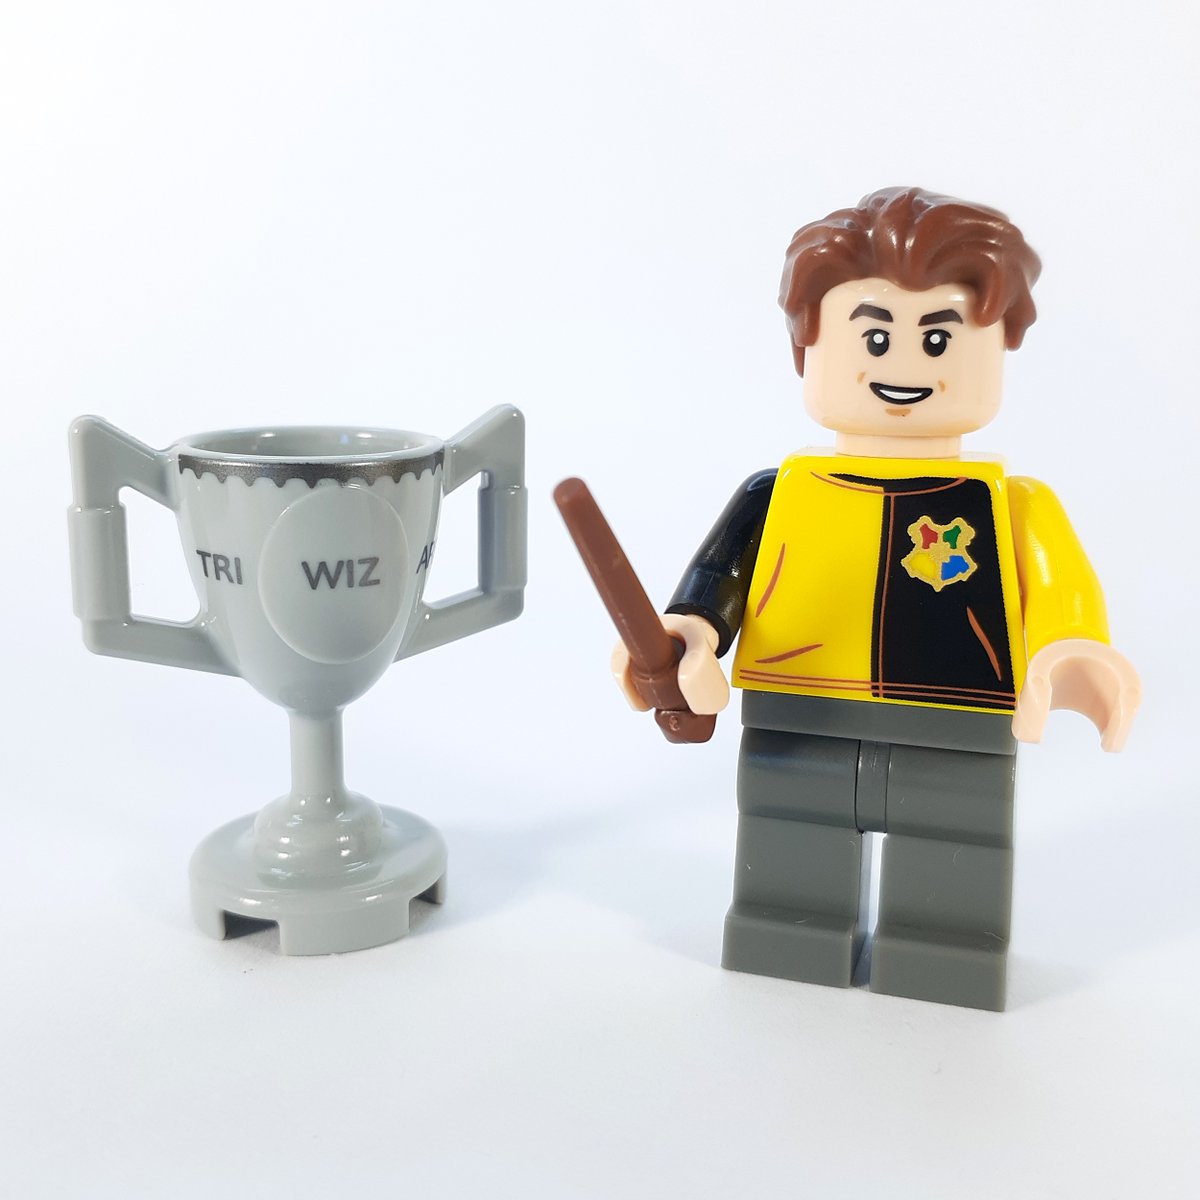 Cedric Diggory
Minifig Monday!
Cedric Diggory wearing his Triwizard - Hufflepuff house jersey with the Triwizard cup.
From: Lego Harry Potter and Fantastic Beasts minifigures
Minifigure 12, Cedric Diggory
#lego #cedricdiggory #cedric #gobletoffire #triwizardcup #hufflepuff